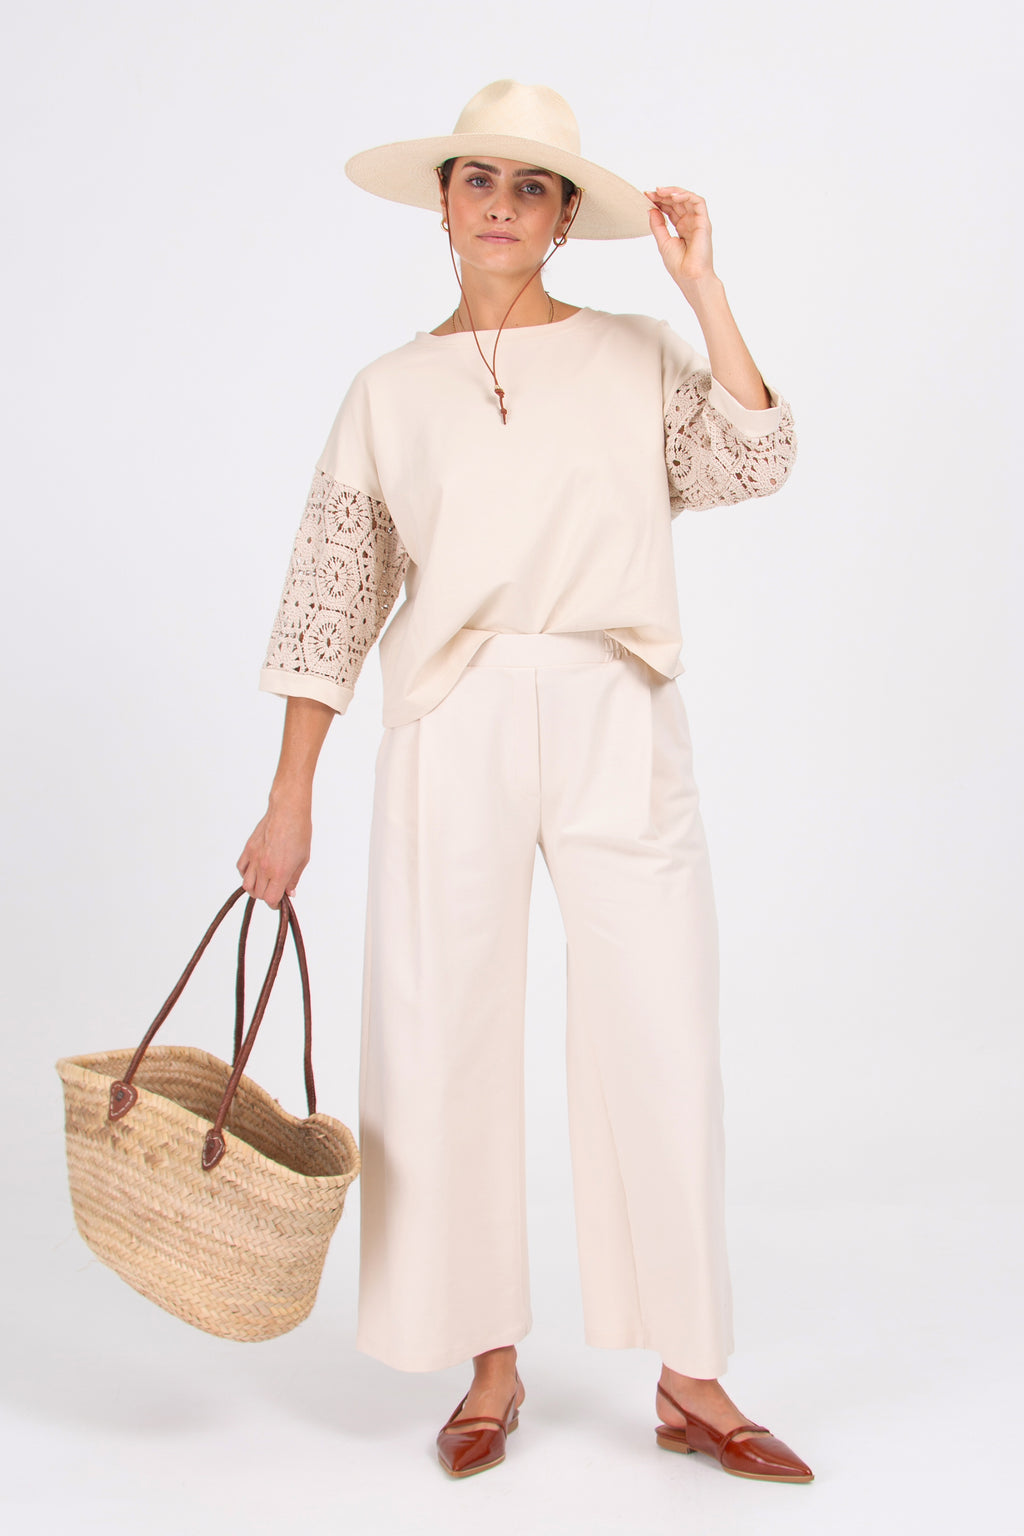 Diana beige sweater with crochet sleeves